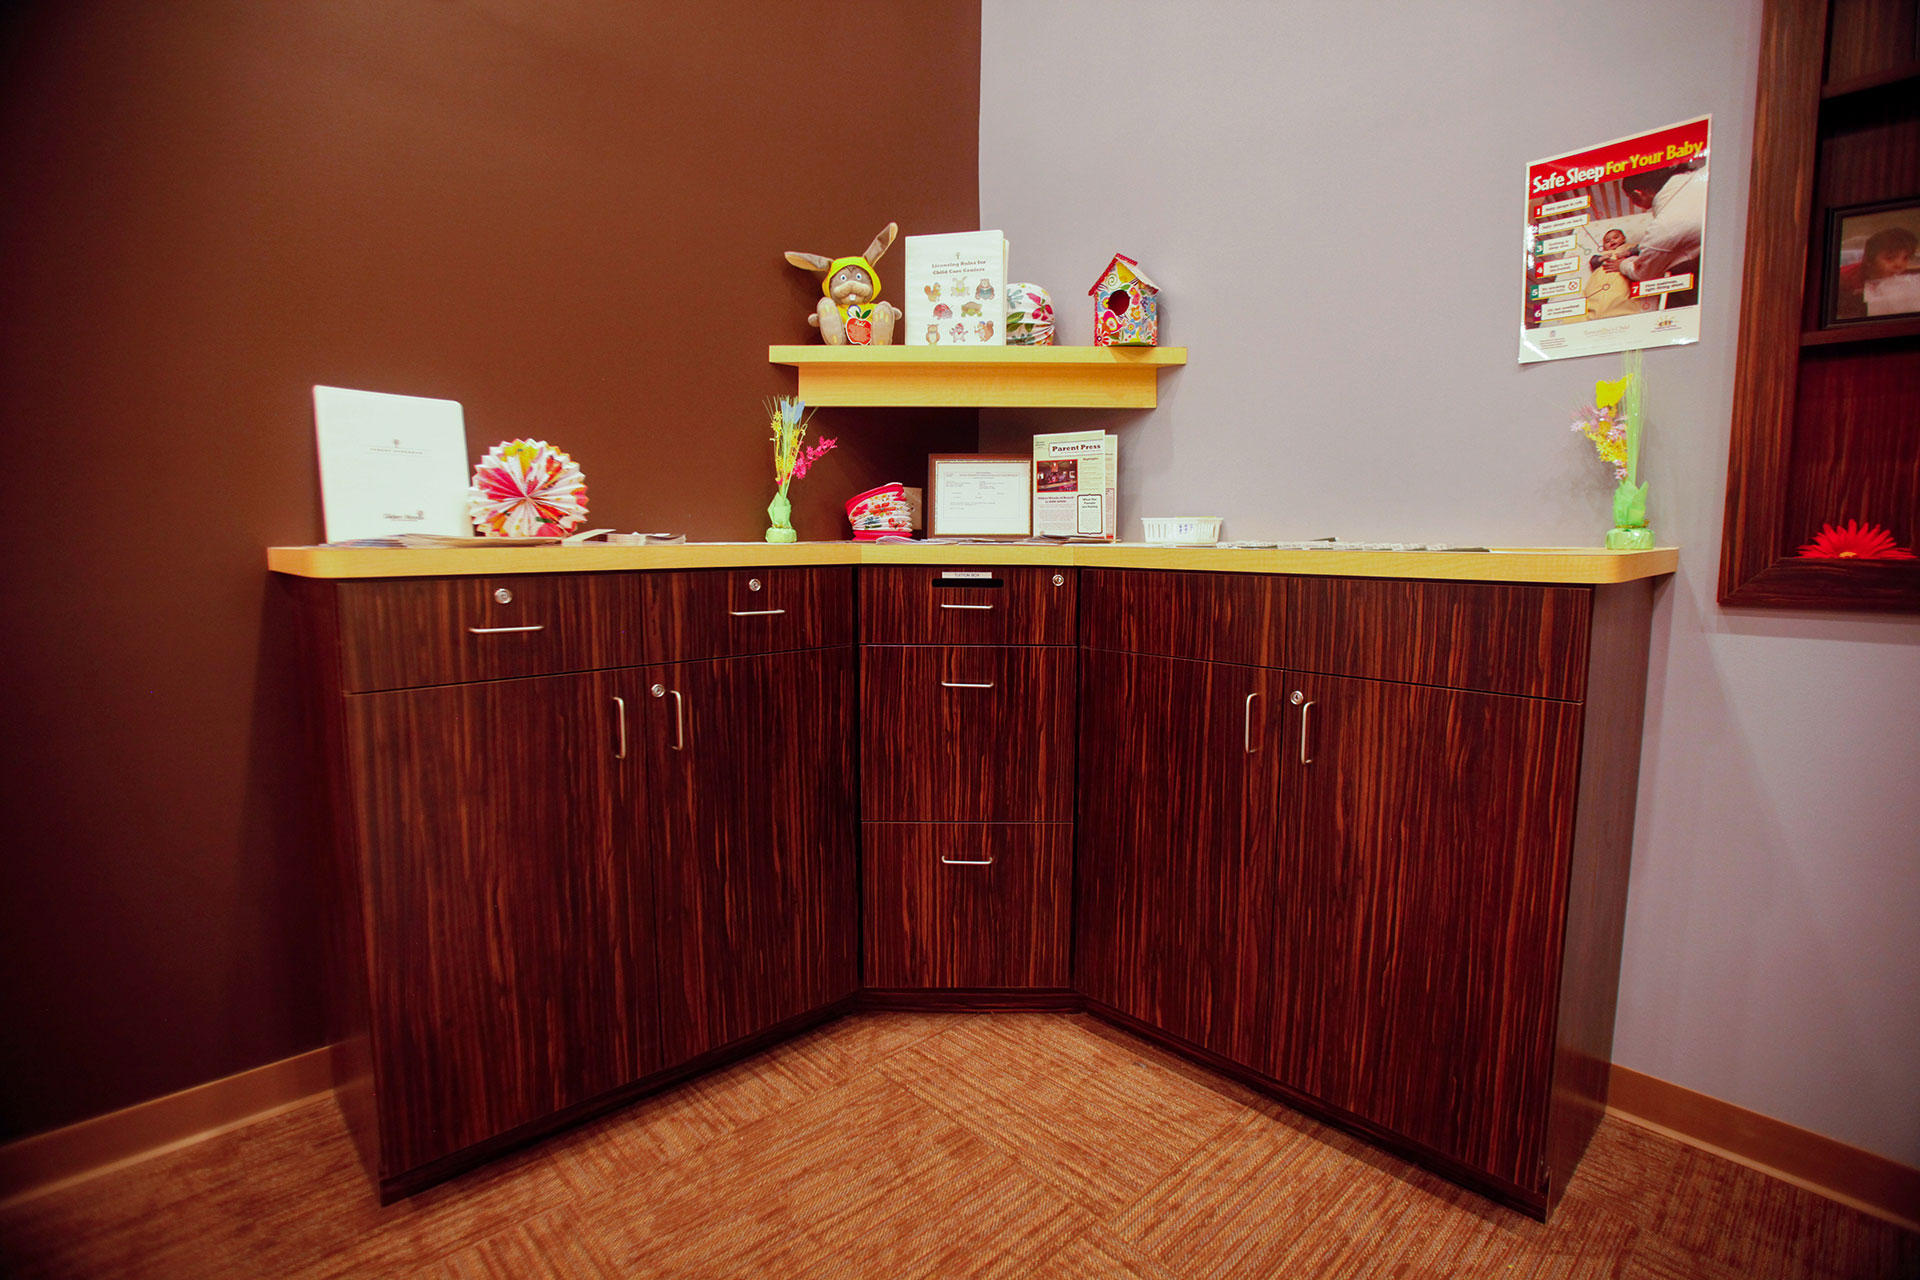 Custom plastic laminate base cabinets with plastic laminate countertops and shelf built for heavy usage.